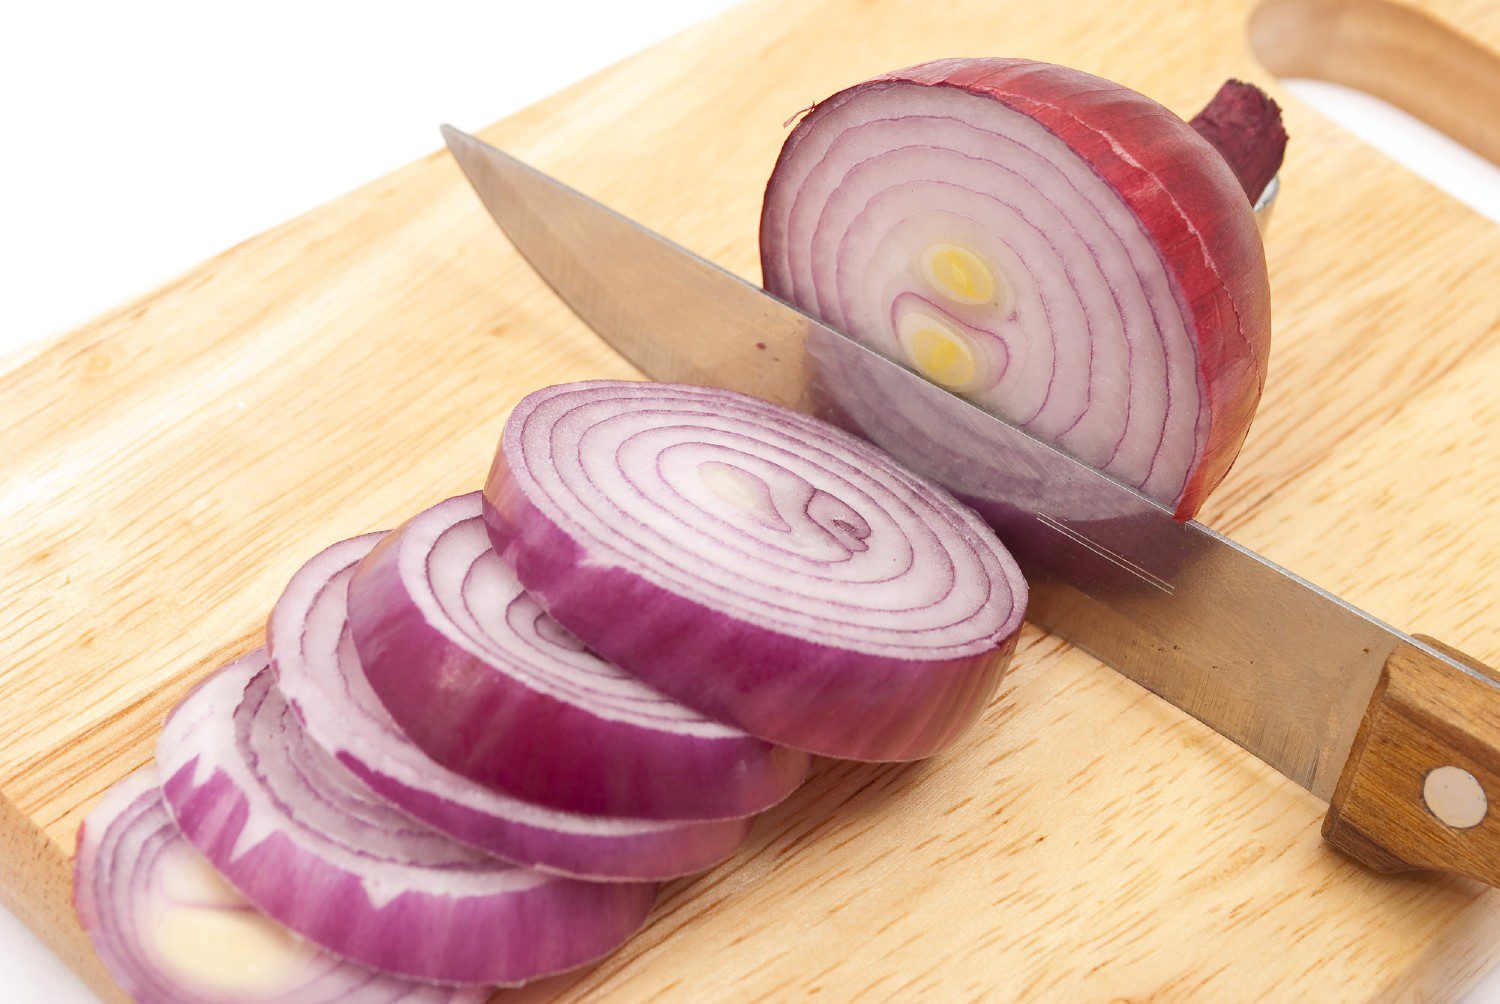 How To Store Cut Onions Without Smell